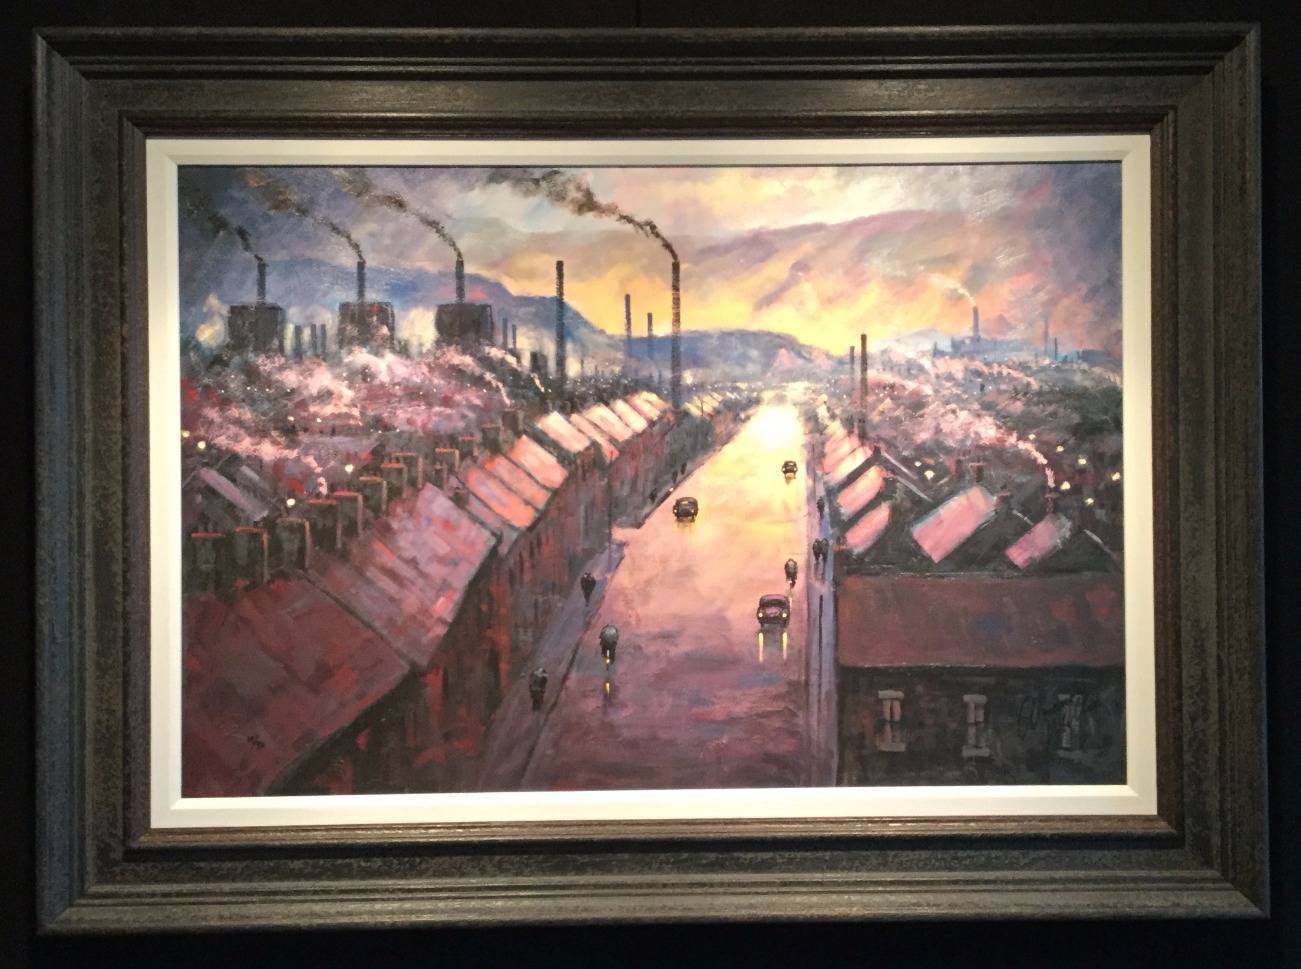 Here is my Valley by Alexander Millar